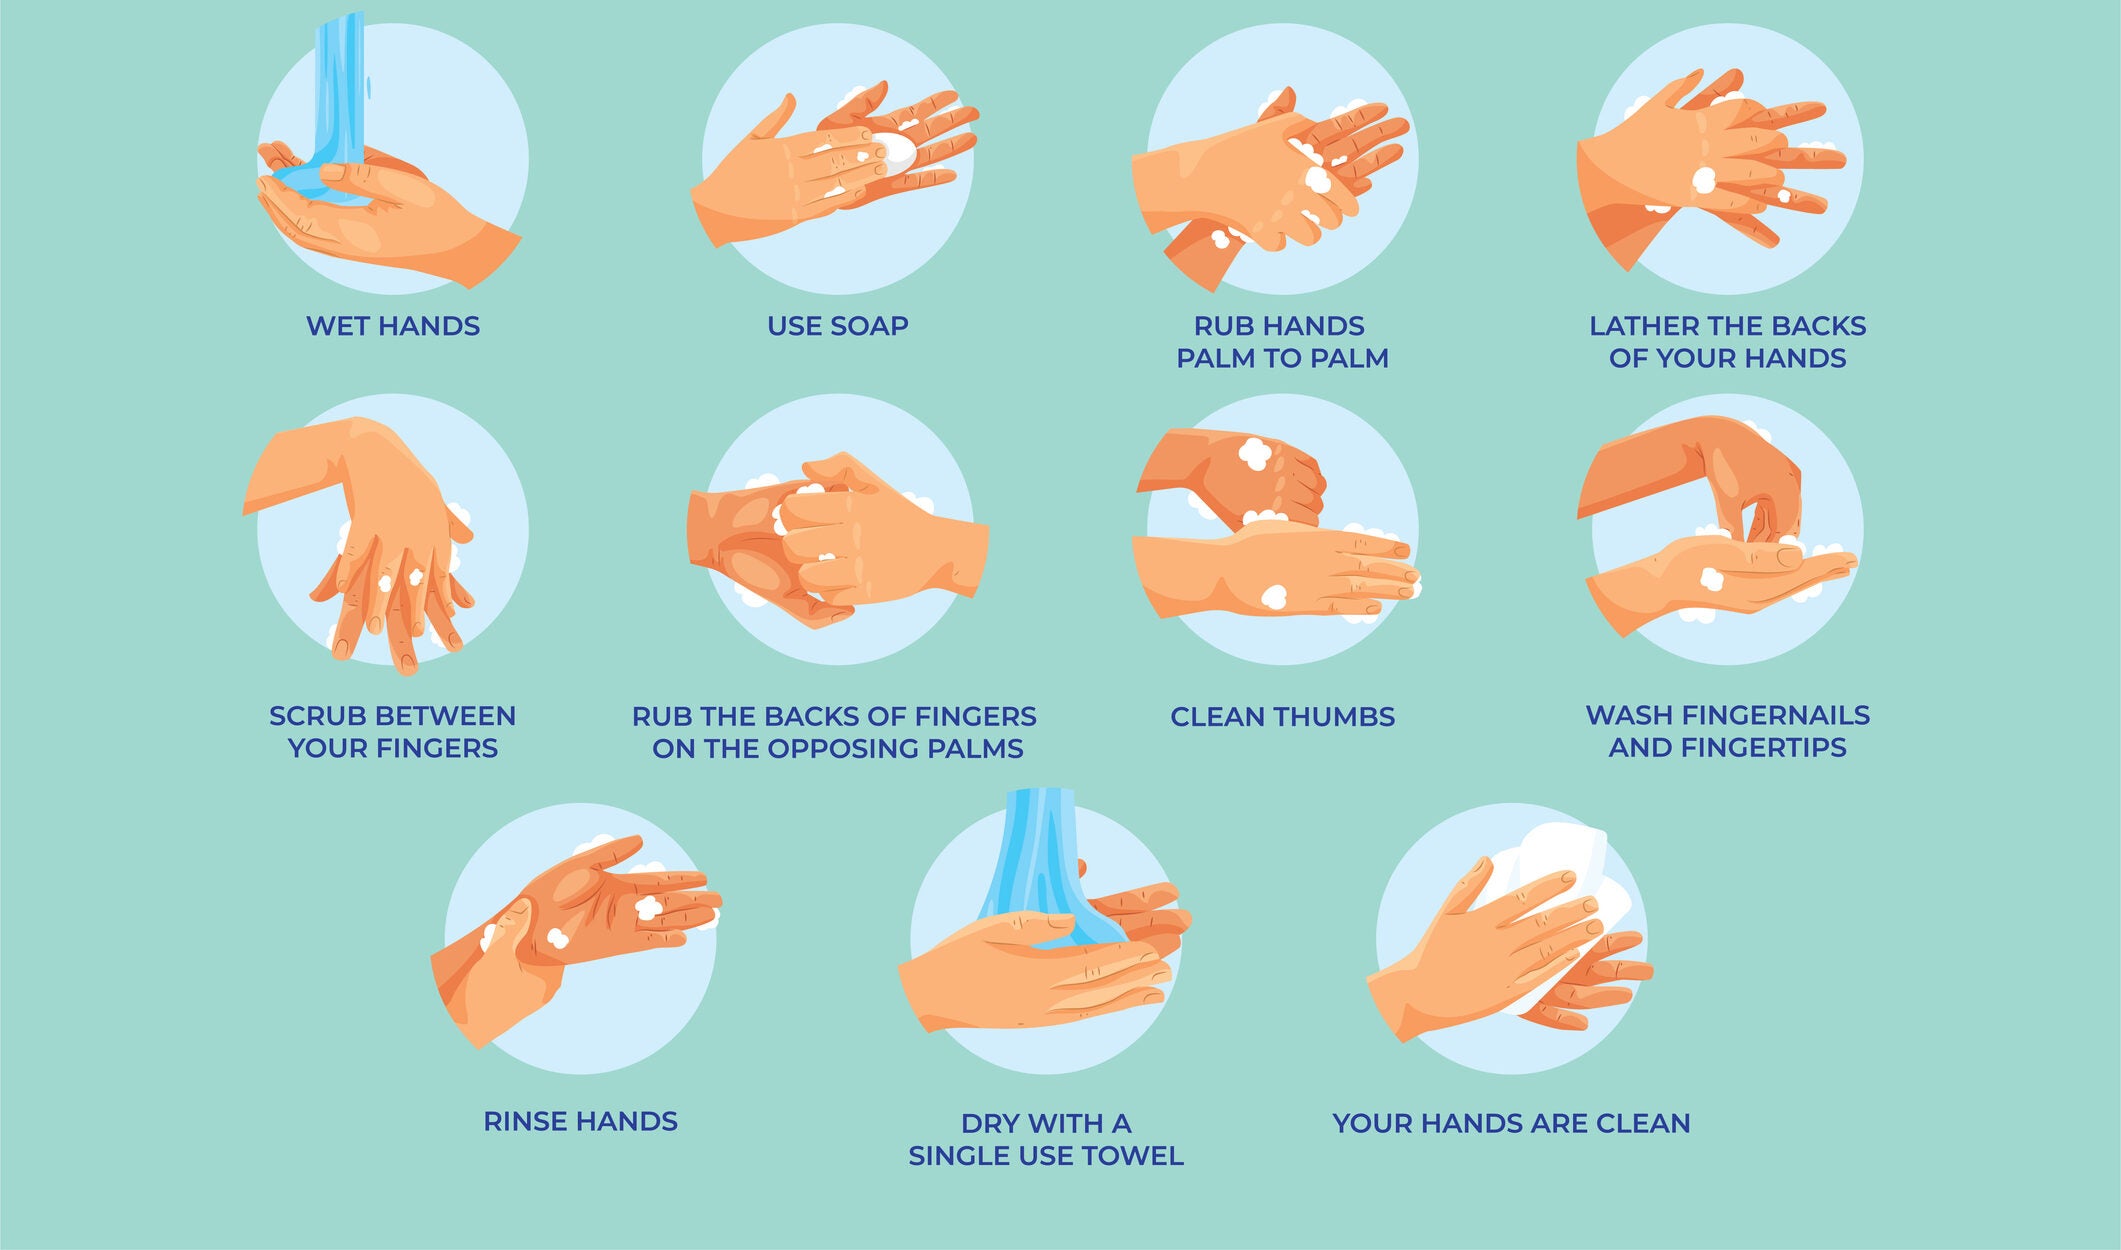 Personal hygiene, disease prevention and healthcare educational vector poster : how to wash your hands properly step by step vector poster